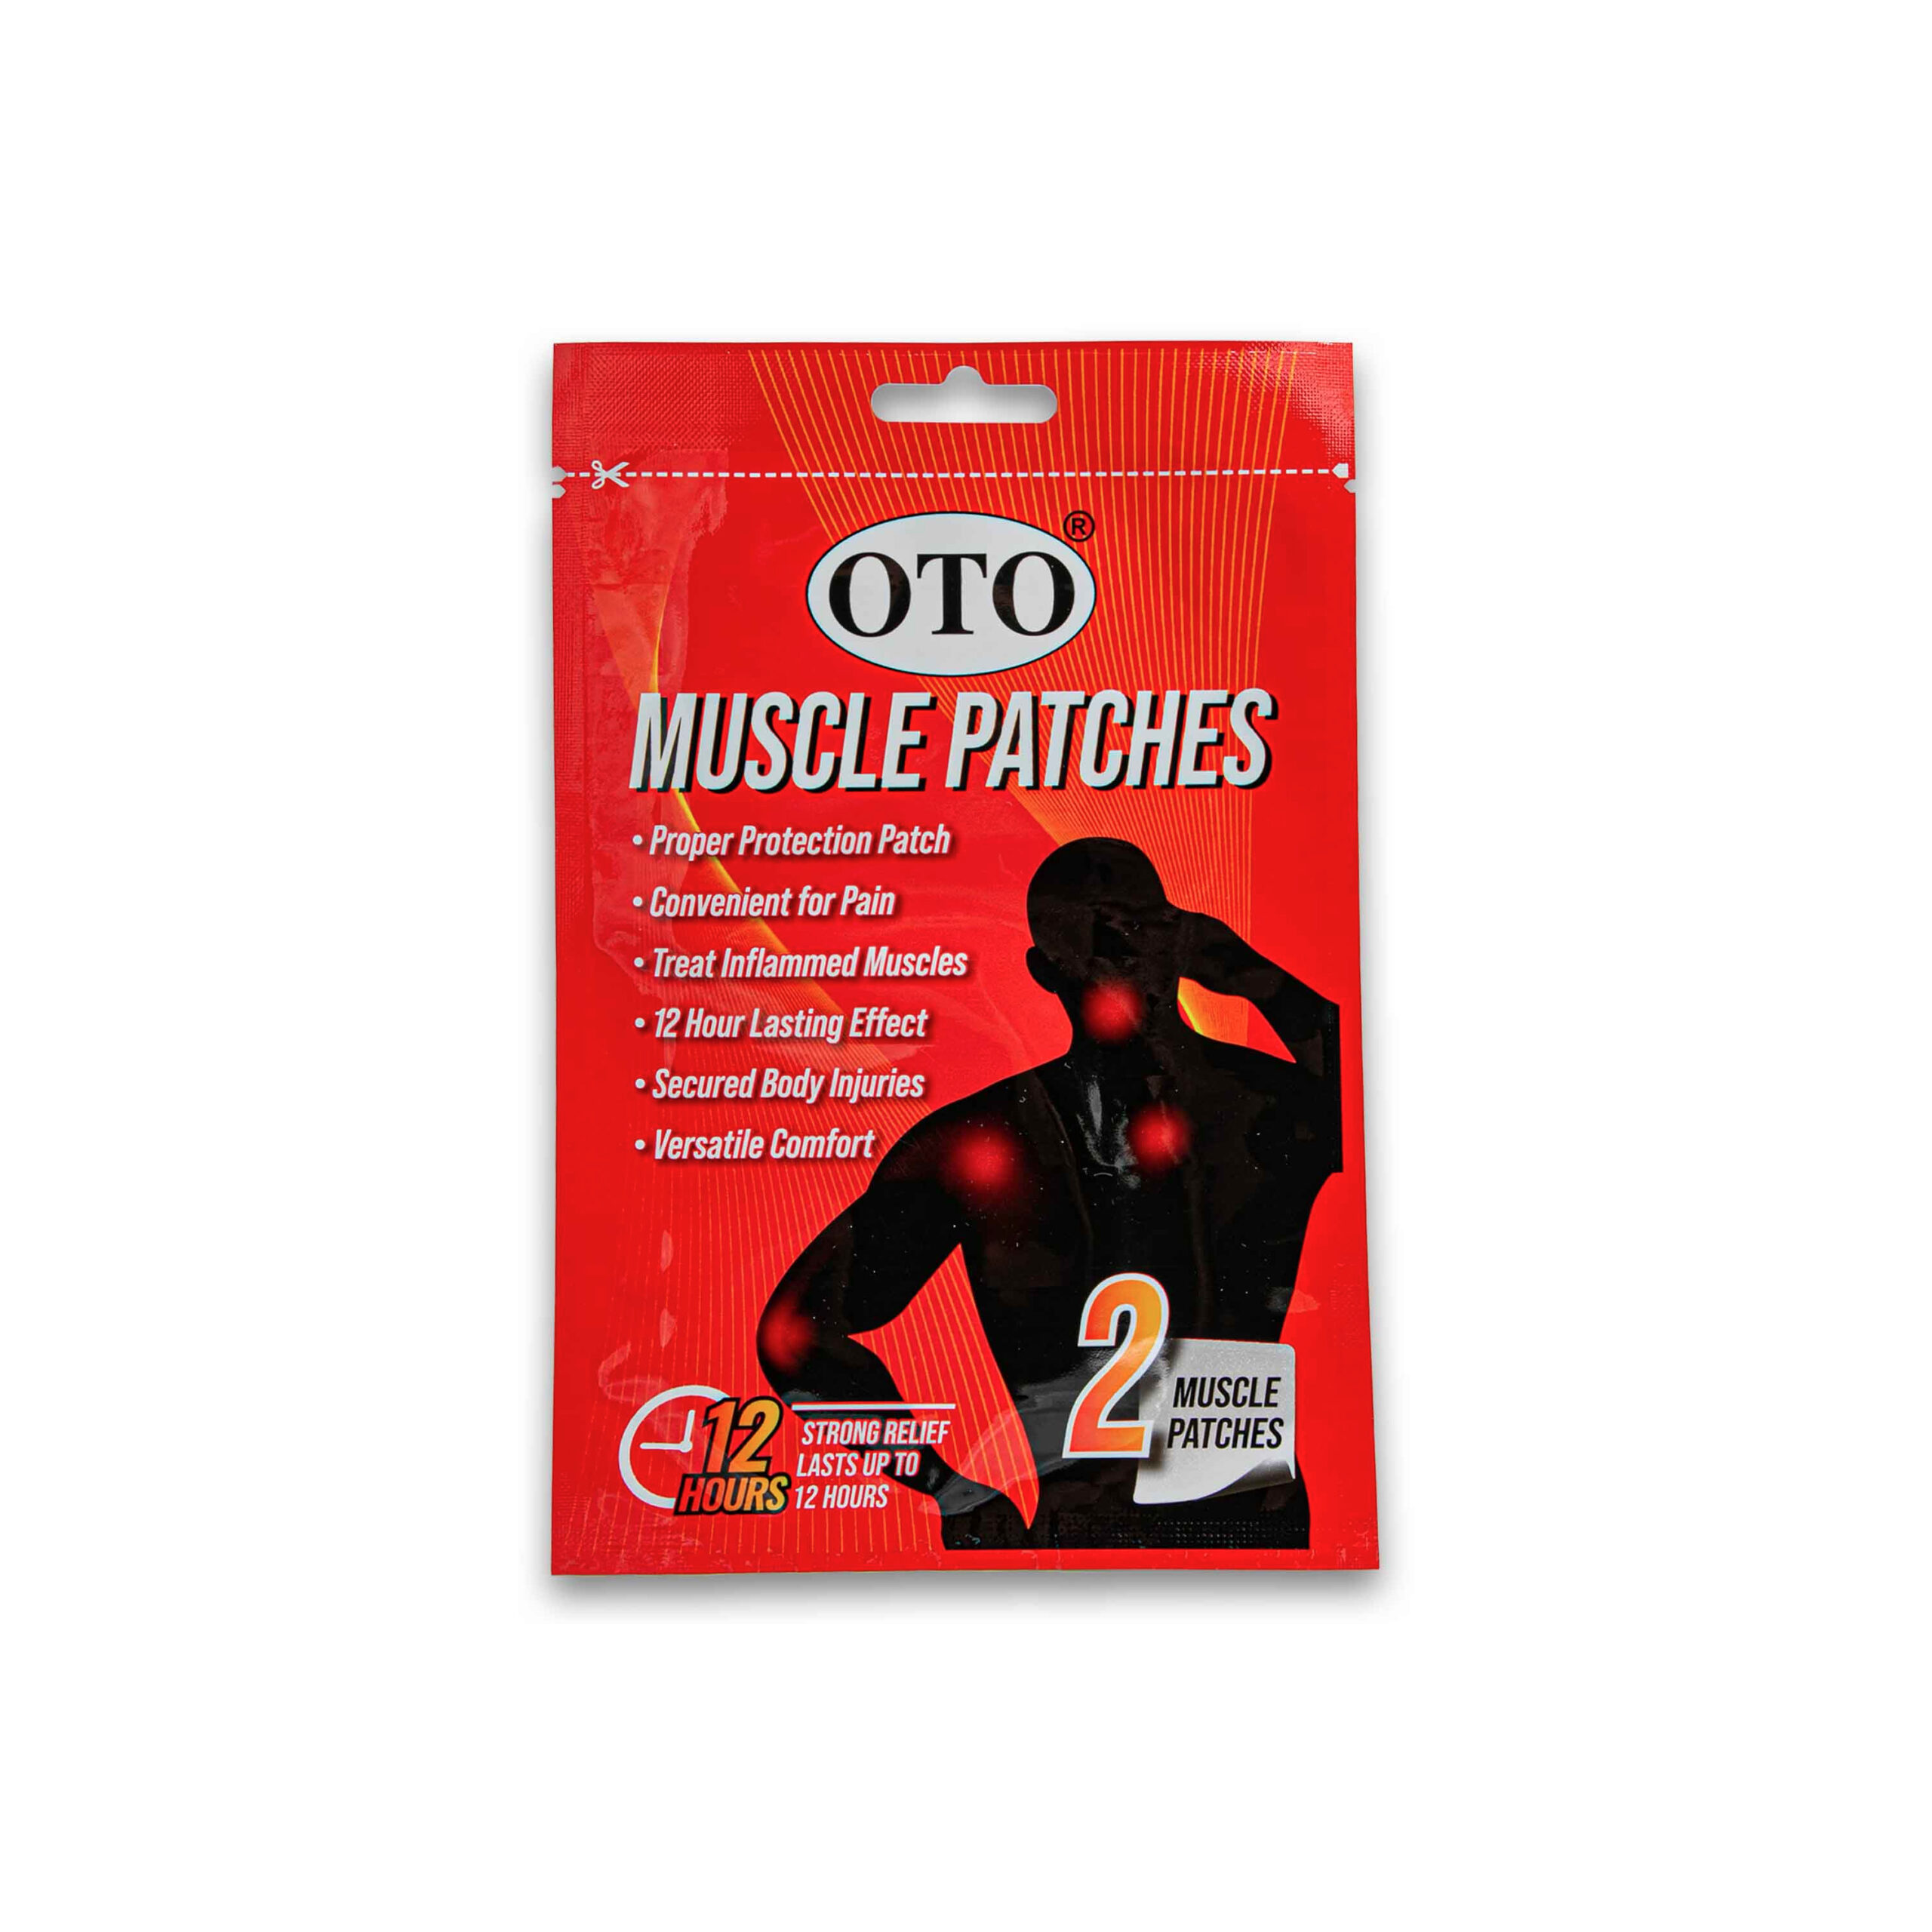 OTO MUSCLE
PATCHES 2 PACK